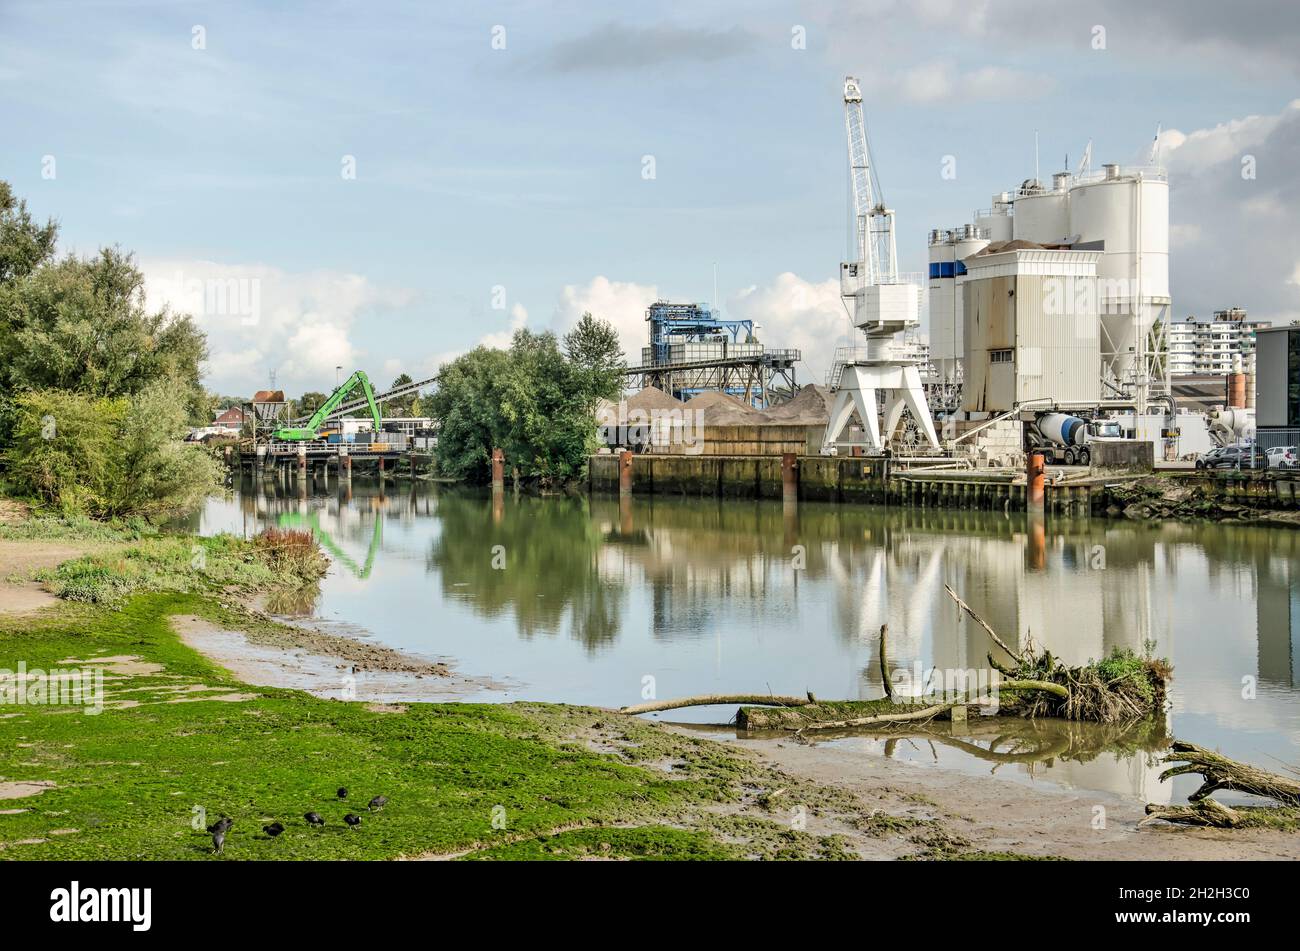 Rotterdam, The Netherlands, October 7, 2021: view from the tidal nature on Brienenoord island towards industrial activities on the other side of Zuidd Stock Photo